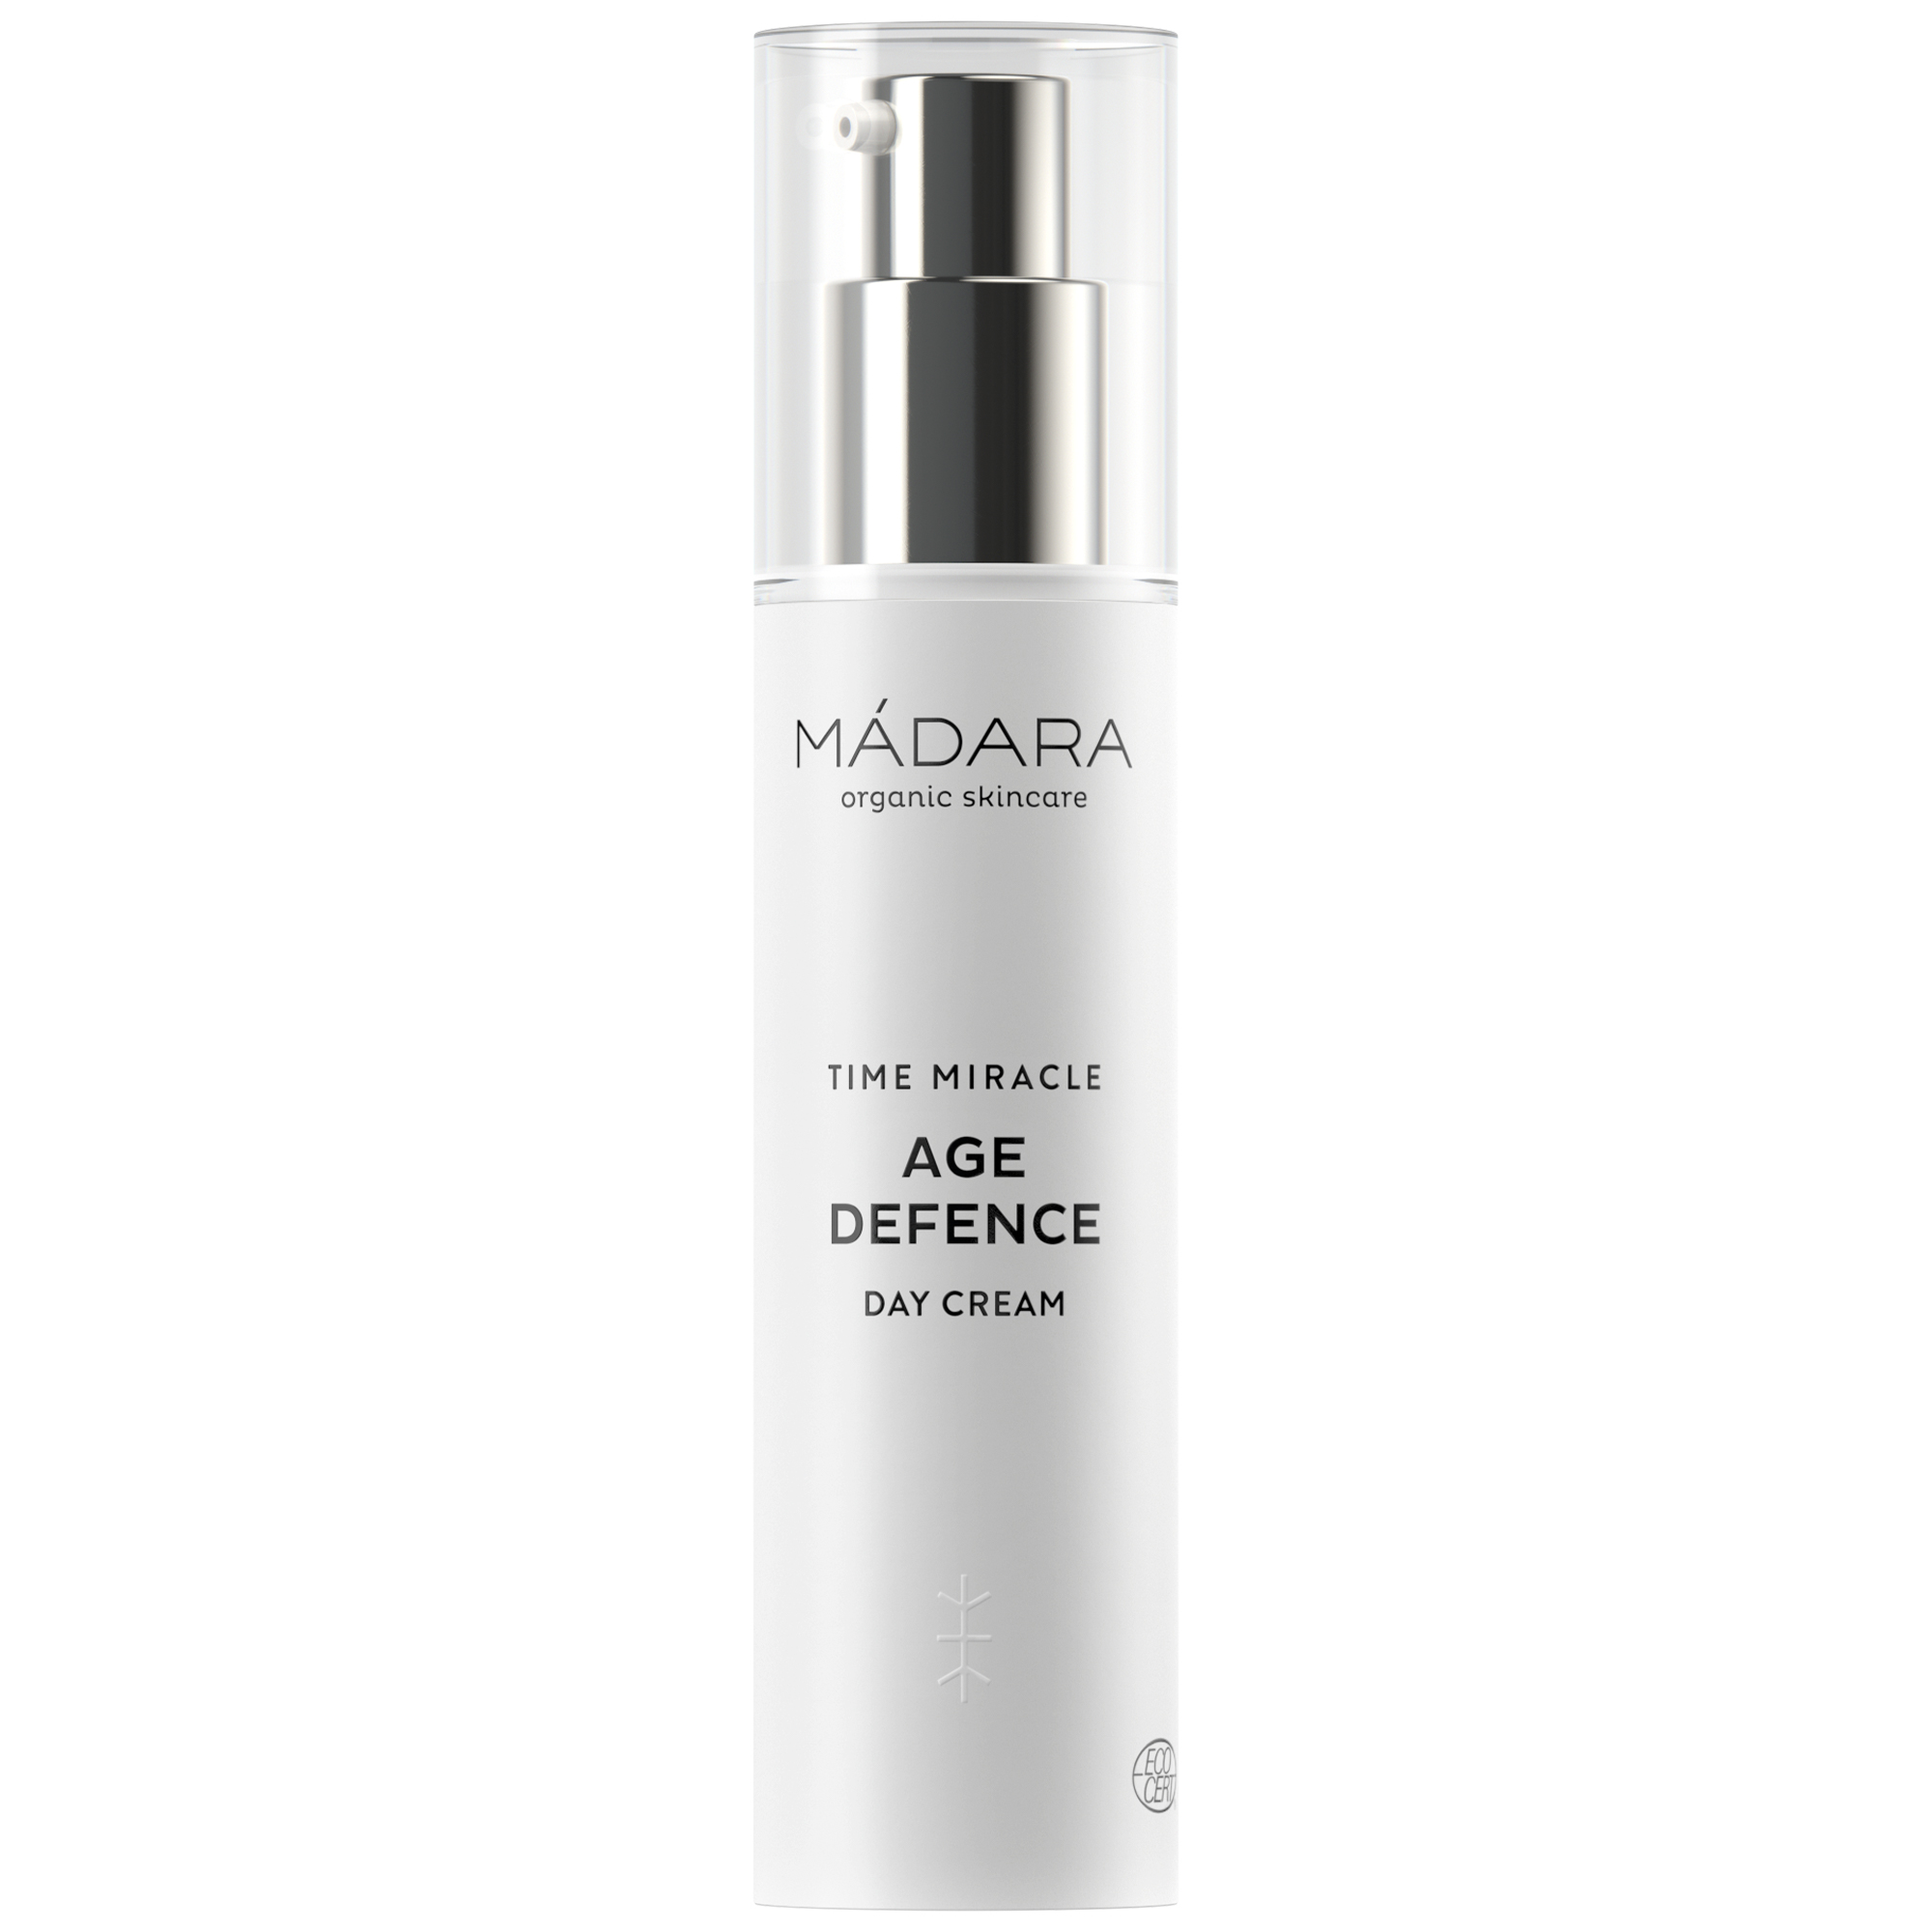 Mádara Time Miracle Age Defence day cream